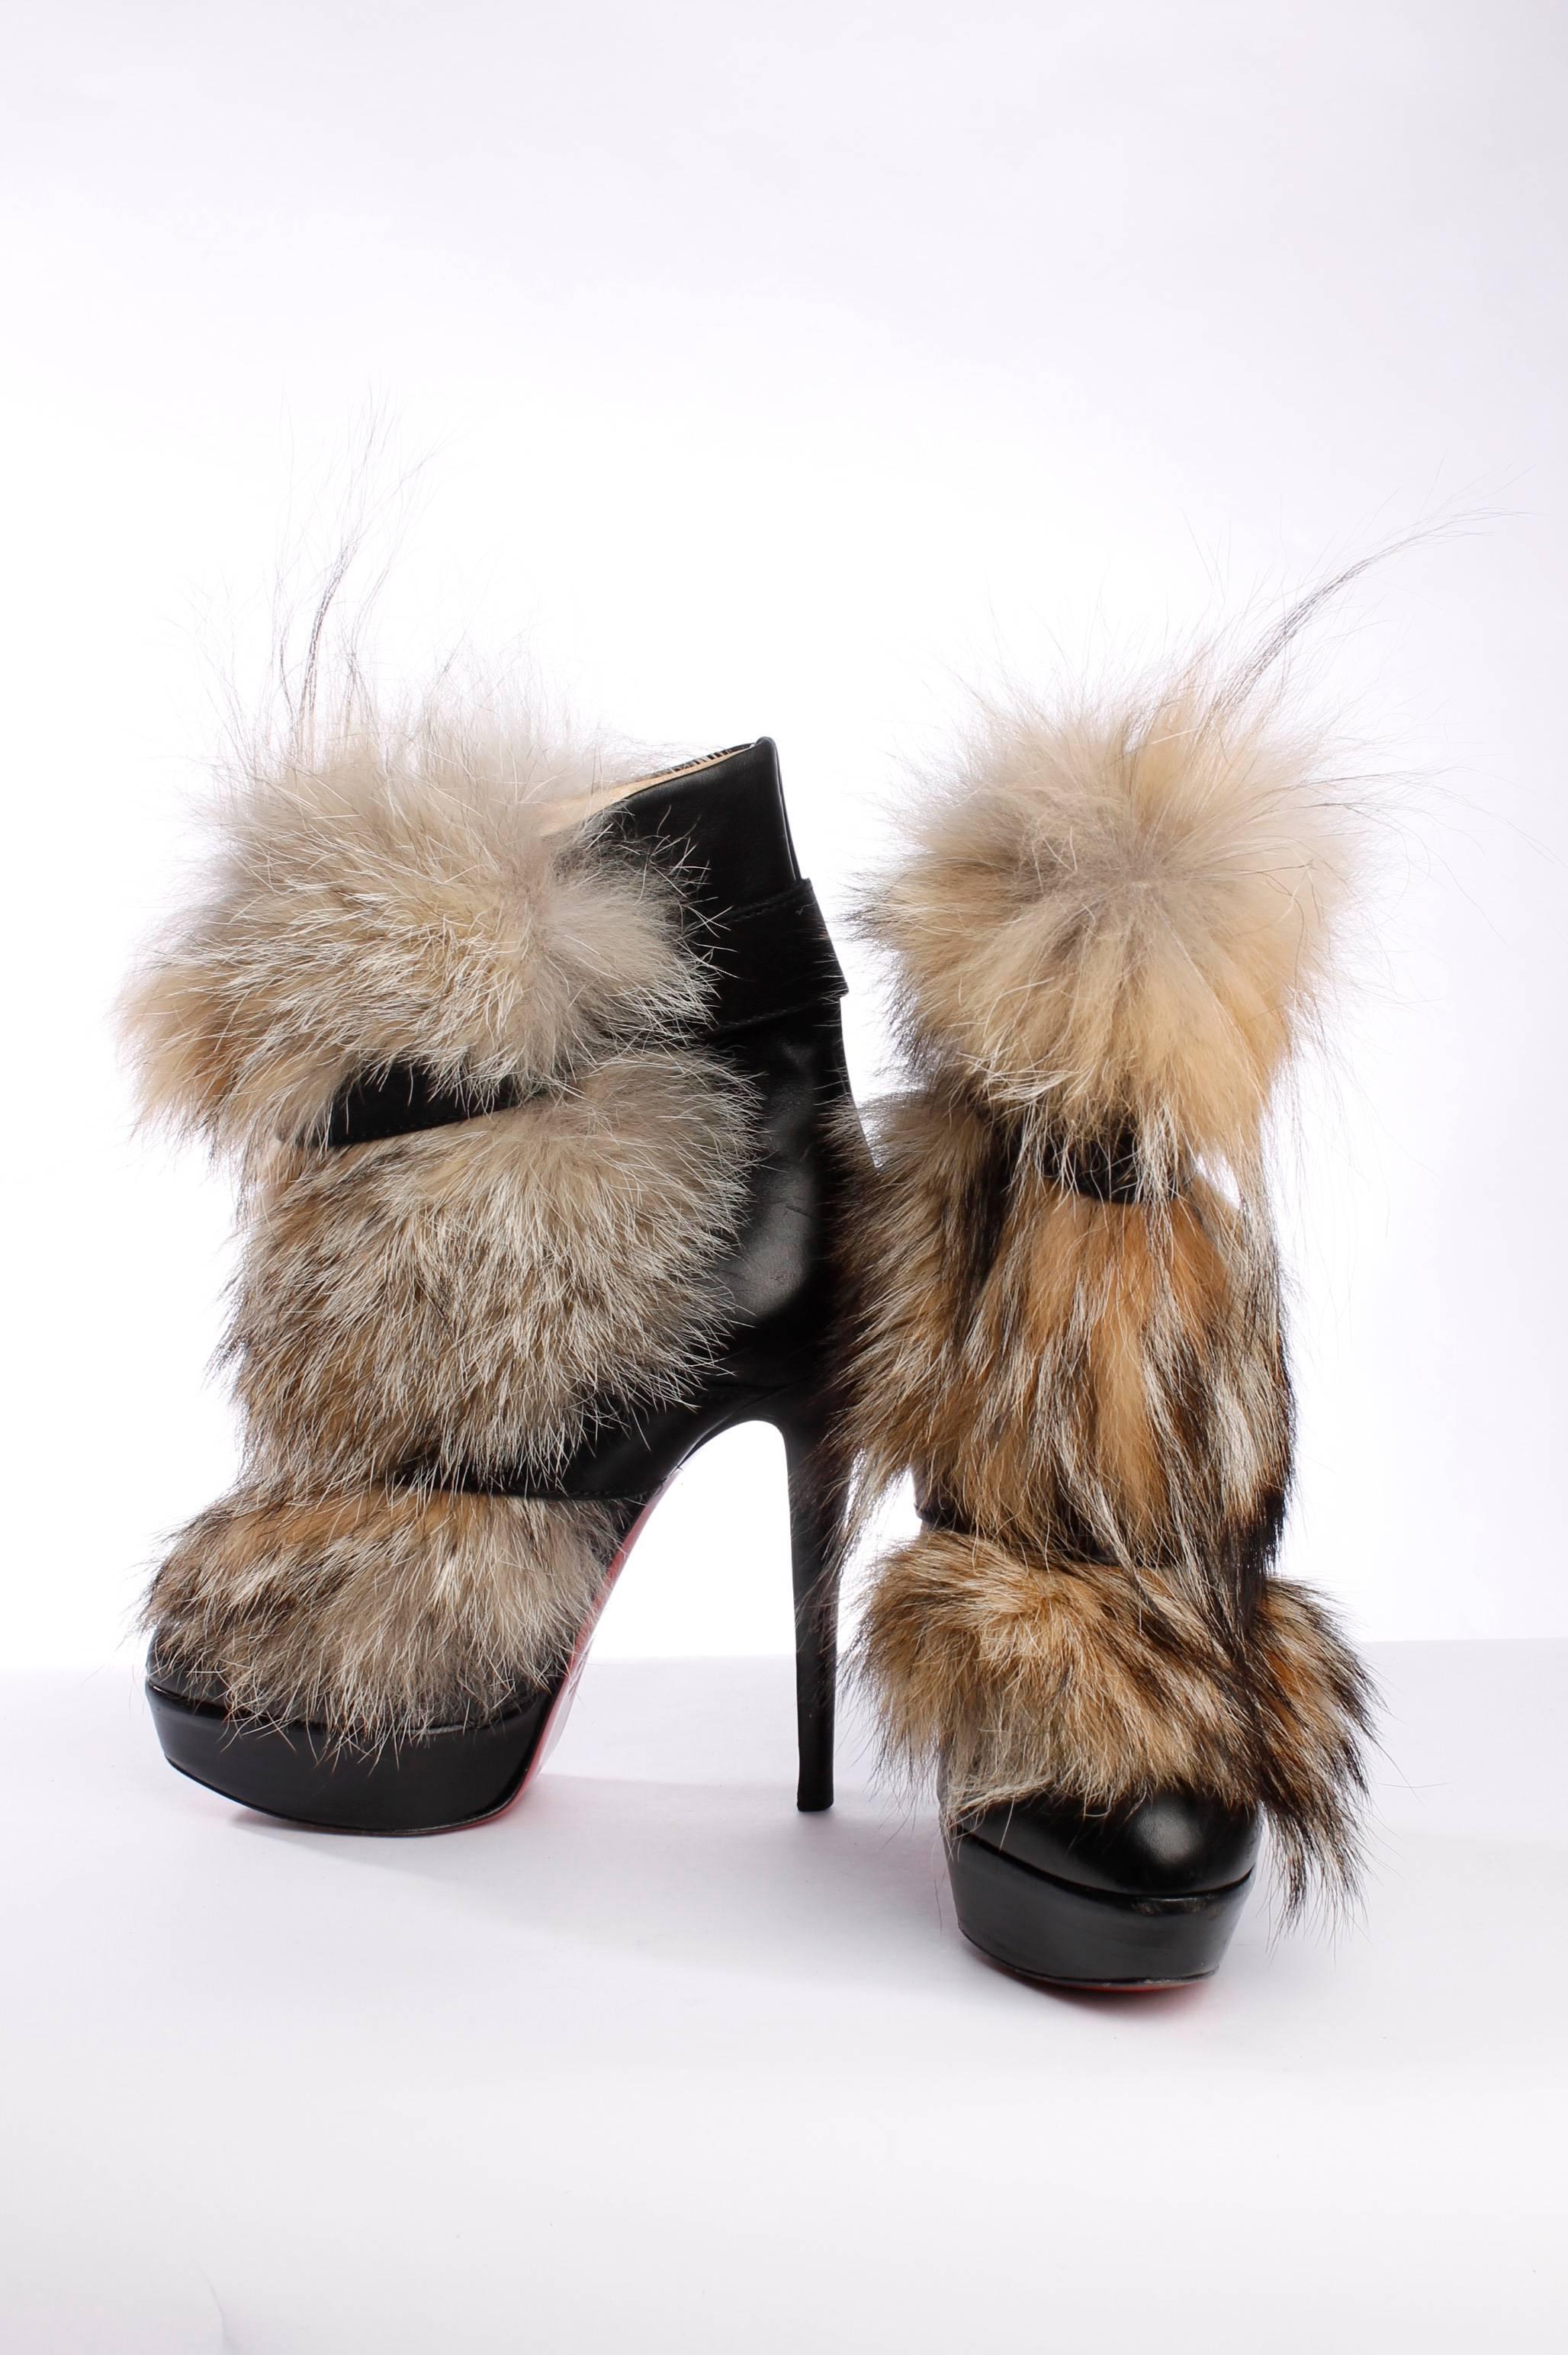 Winter is coming! Time to wear these outstanding Louboutin ankle boots with coyote fur on the front.

A little strap around the ankle and foot keep this boot in its place. The heel is 13 centimeters high and the platform 3 centimeters. On the